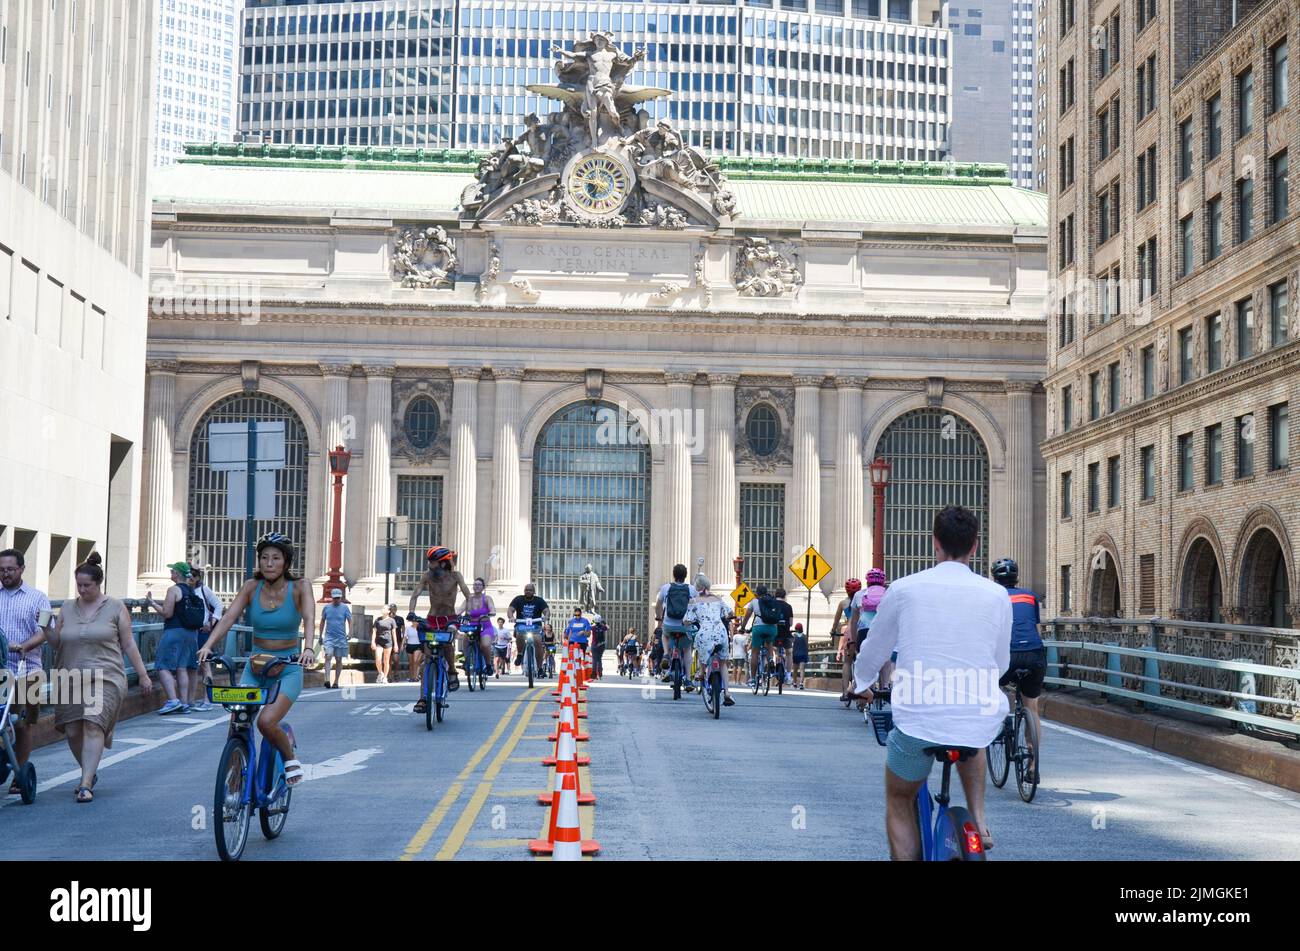 New Yorkers are seen biking on Park Avenue near Grand Central during car free “Summer Streets” along Park Avenue in New York City. Stock Photo